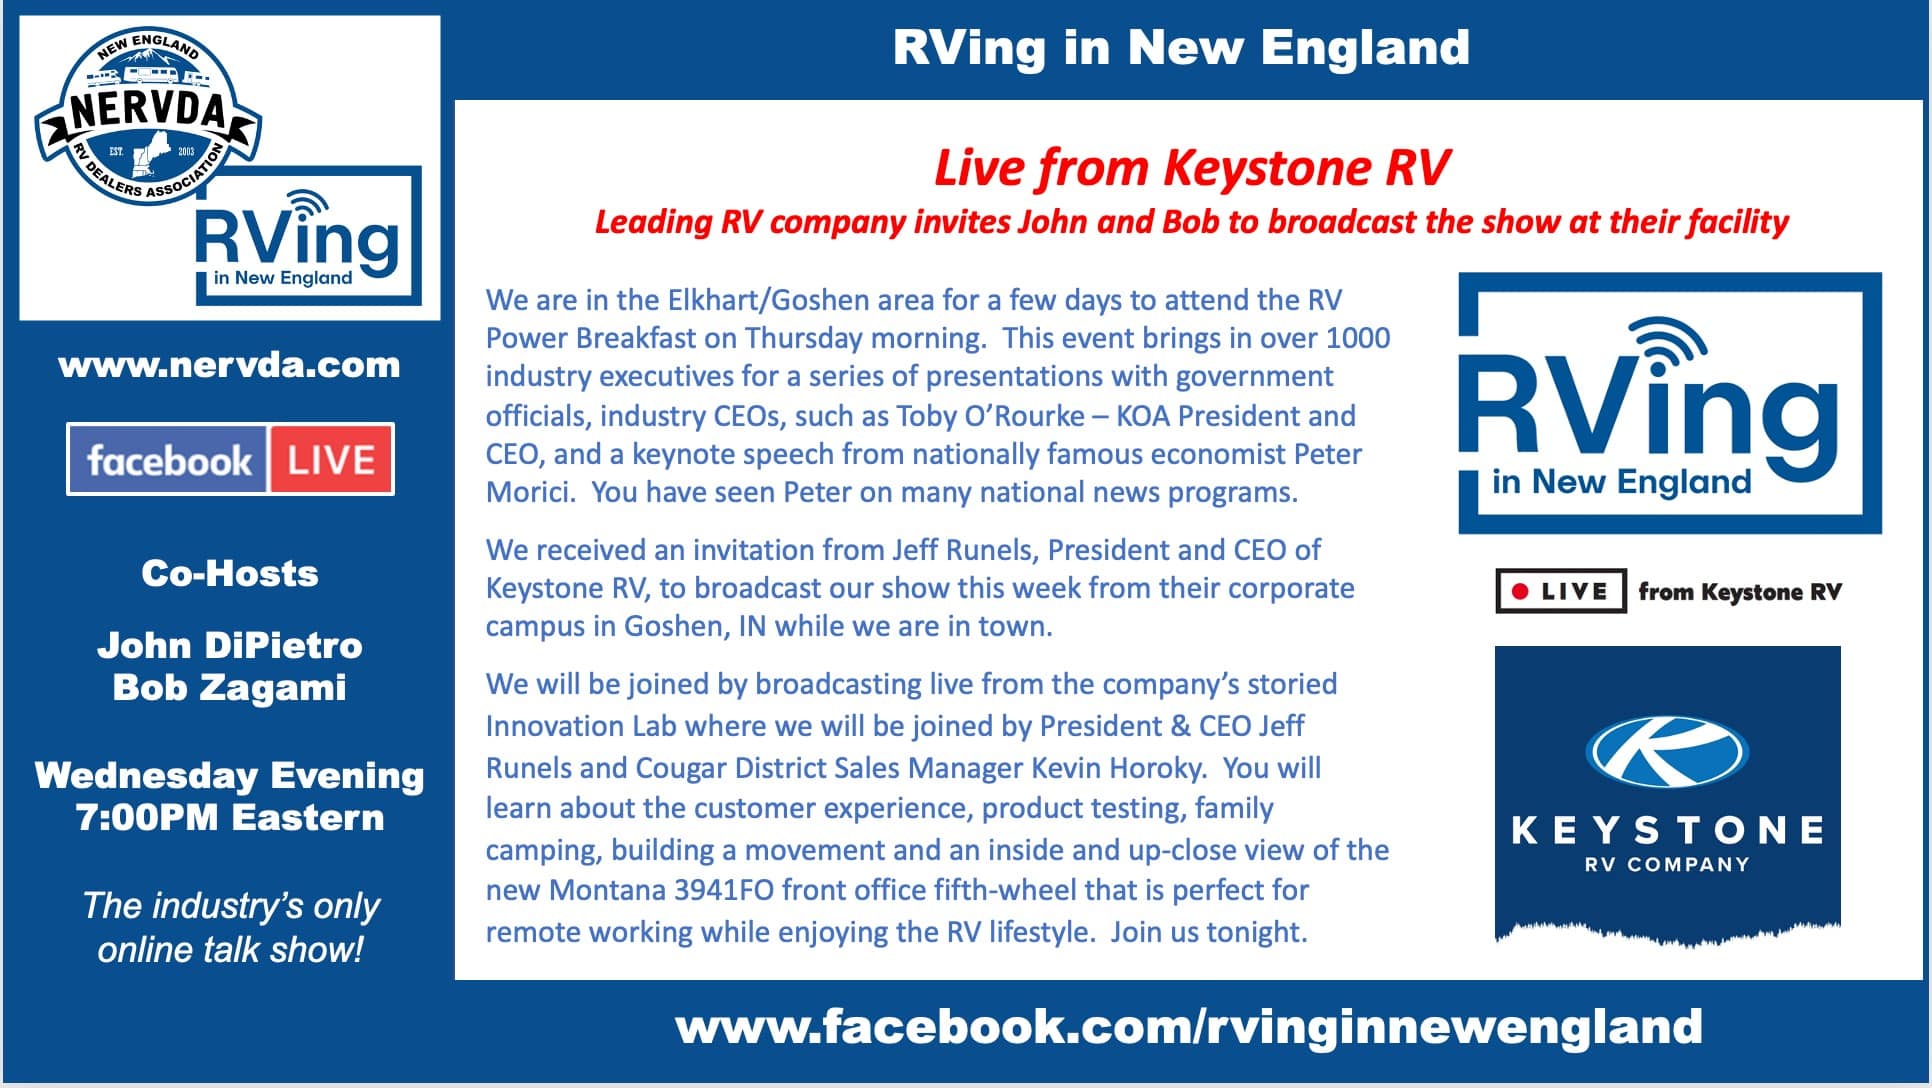 Tonight’s ‘RVing in New England’ Features Keystone RV